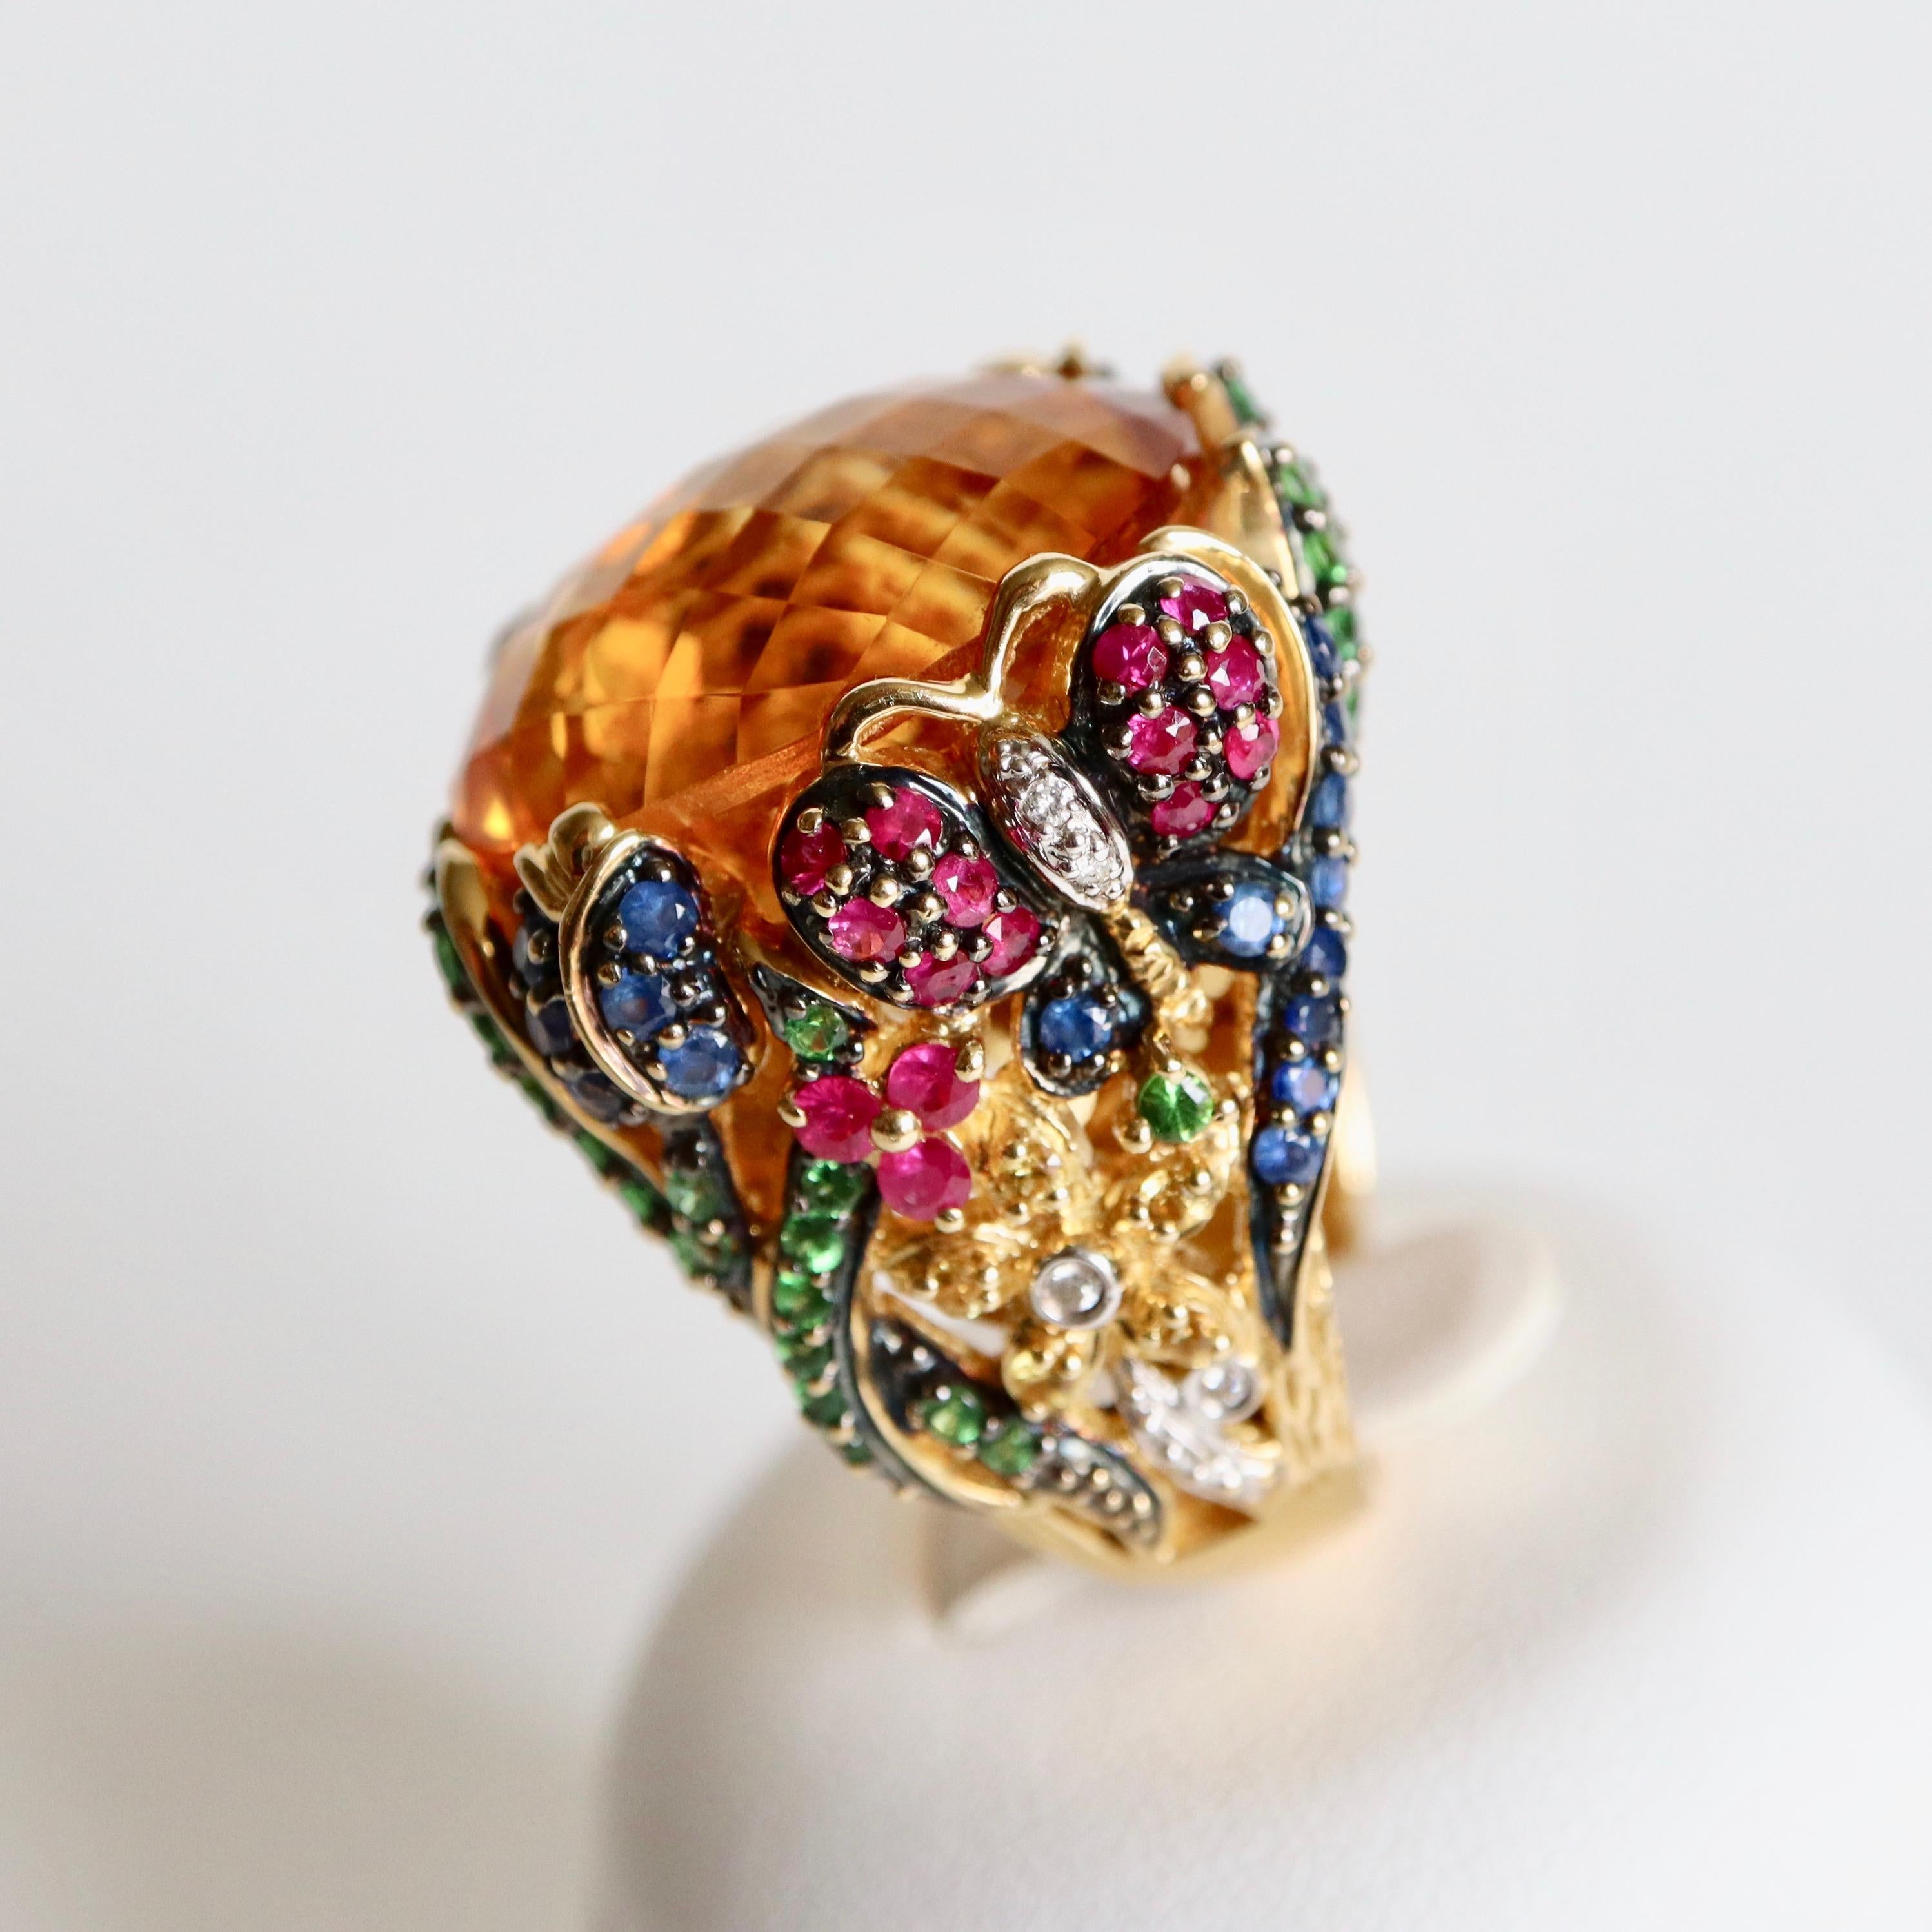 Important Ring with Foliage Pattern and Intertwined Flowers in 18 Carat yellow Gold setting a Large Faceted Oval Citrine Size 16 x 22 mm, the Openwork Body is Decorated with Sapphires, Rubies, yellow Sapphires, Tsavorite Garnets and Diamonds
Ring